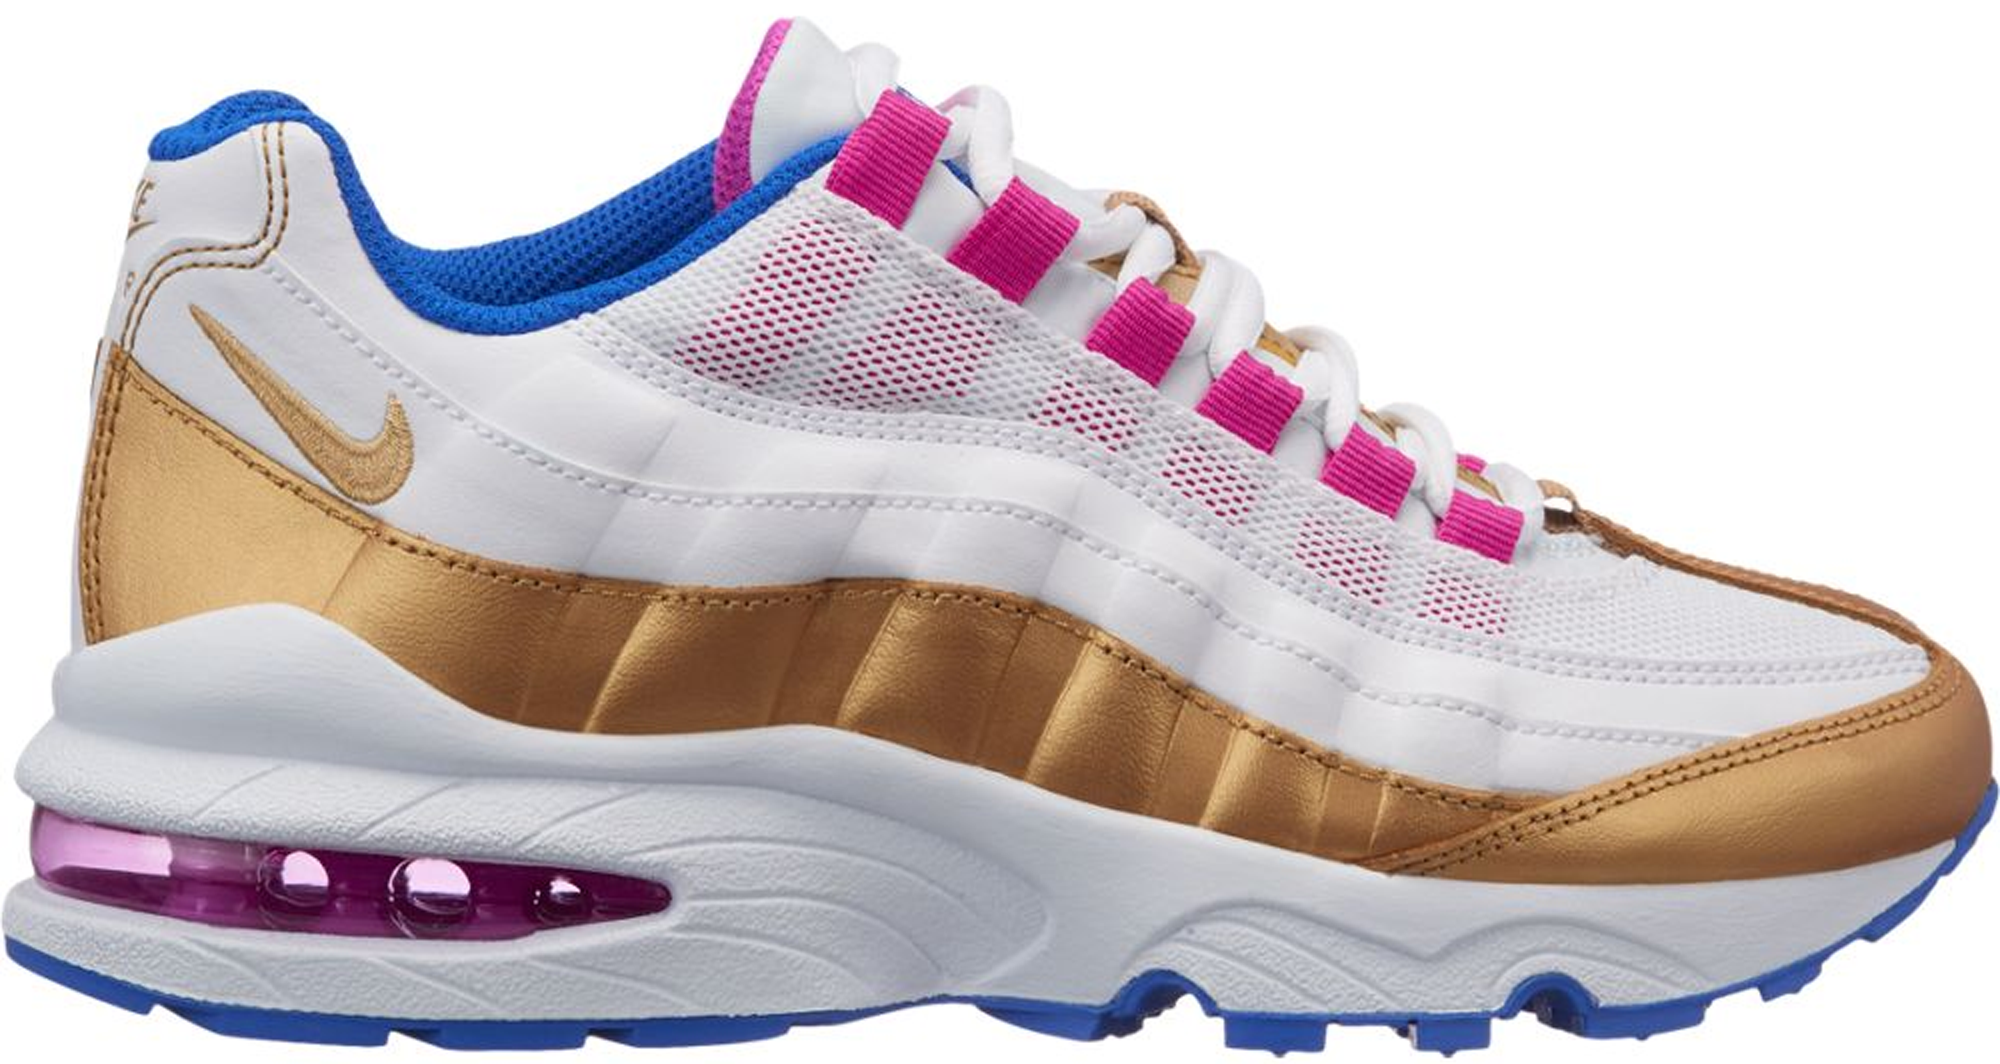 air max 95 peanut butter & jelly